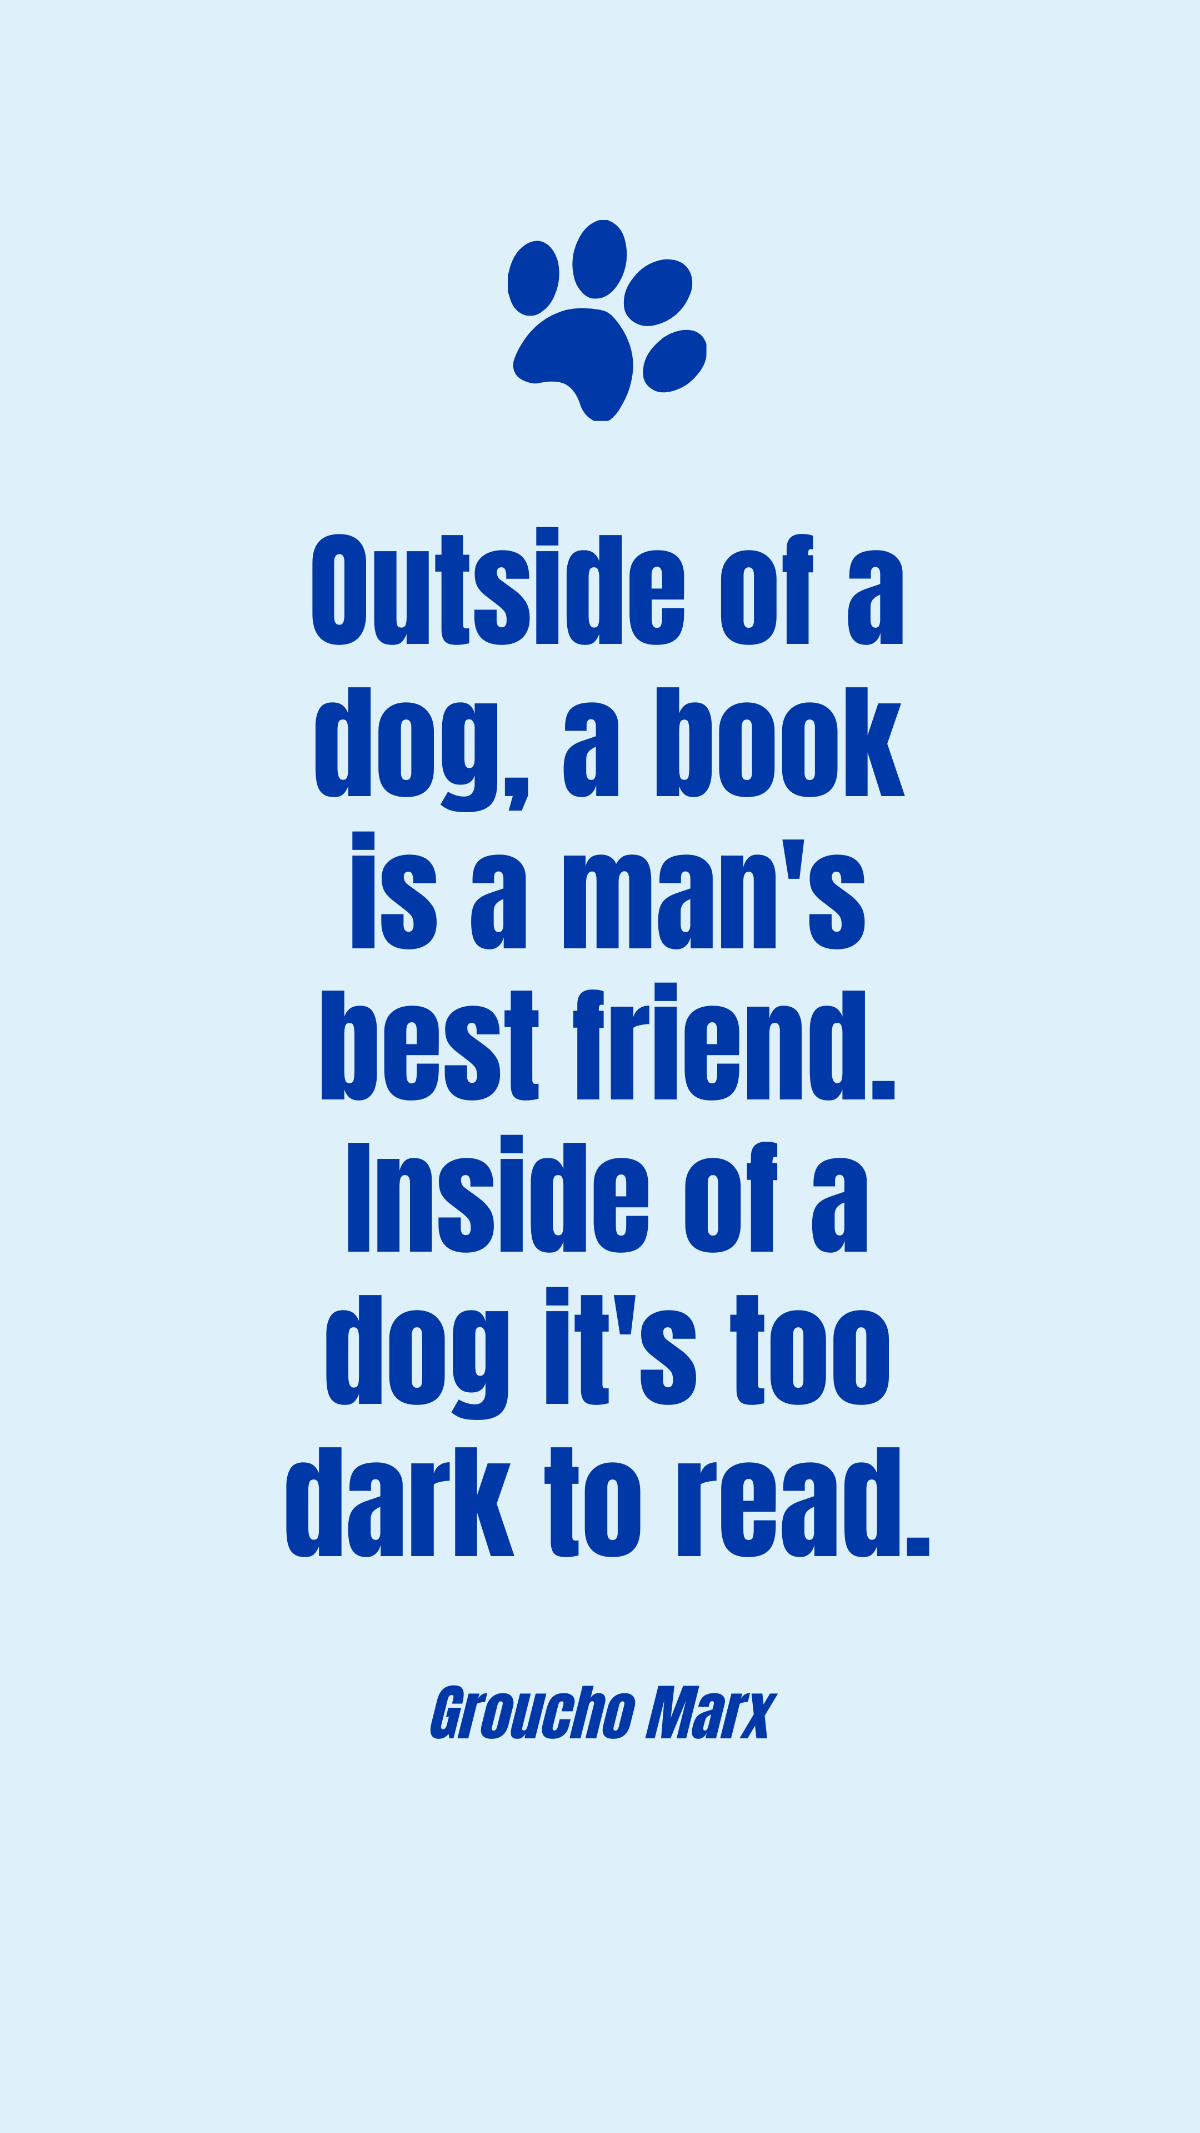 Free Groucho Marx - Outside of a dog, a book is a man's best friend. Inside of a dog it's too dark to read. Template